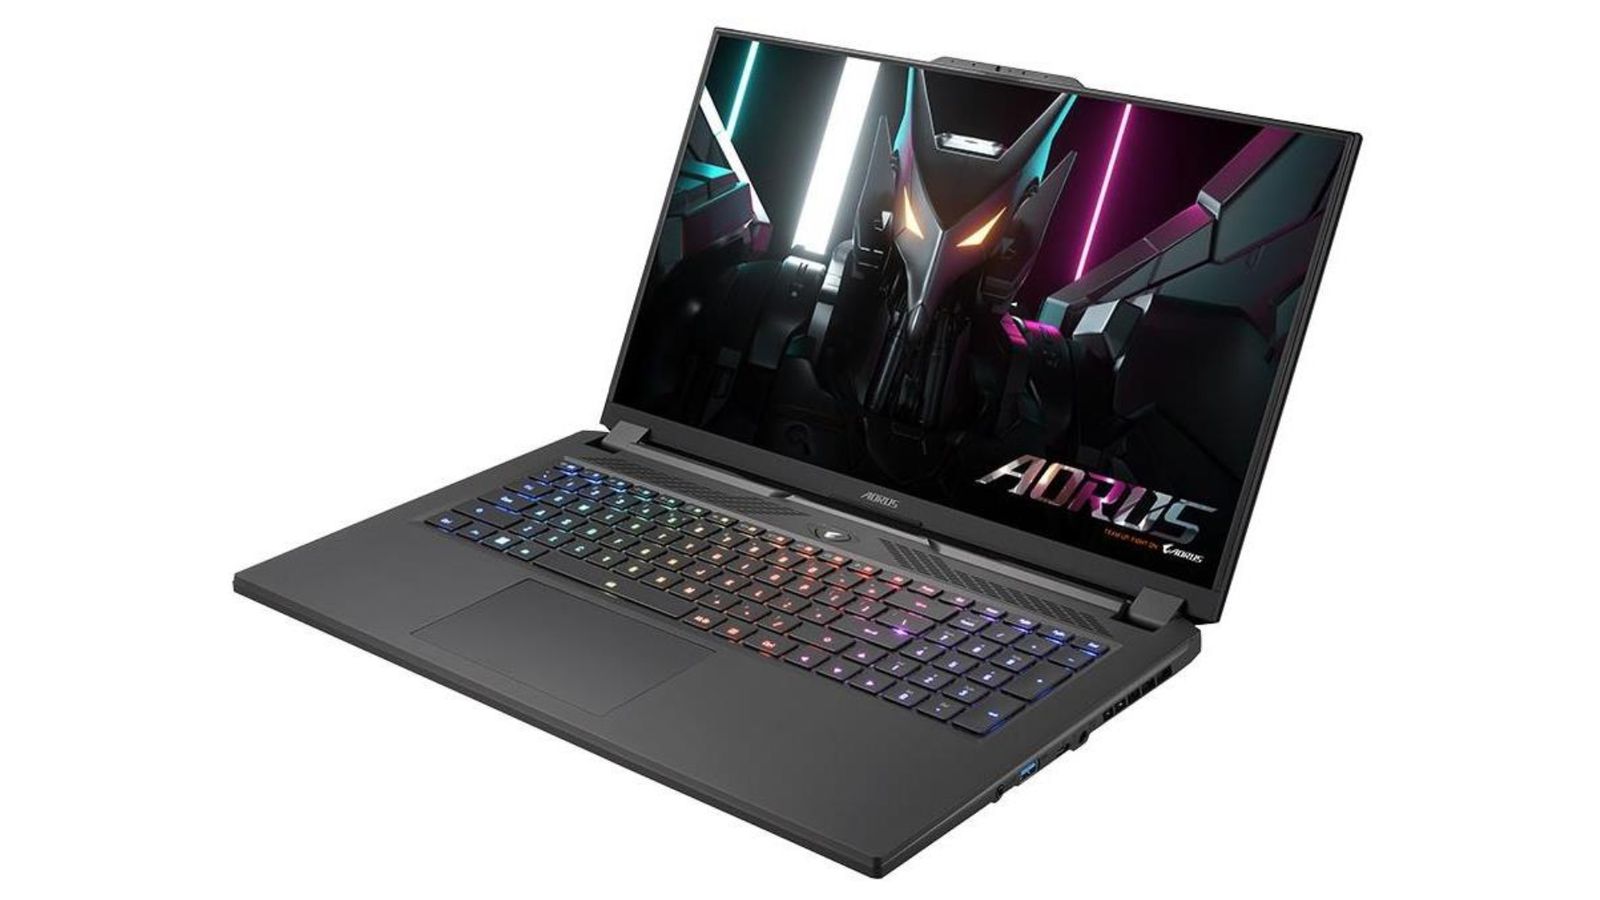 Best Dead Island 2 gaming laptop - Gigabyte AORUS 17H product image of a dark grey laptop featuring multicoloured backlit keys and a mechanical animal on the display.